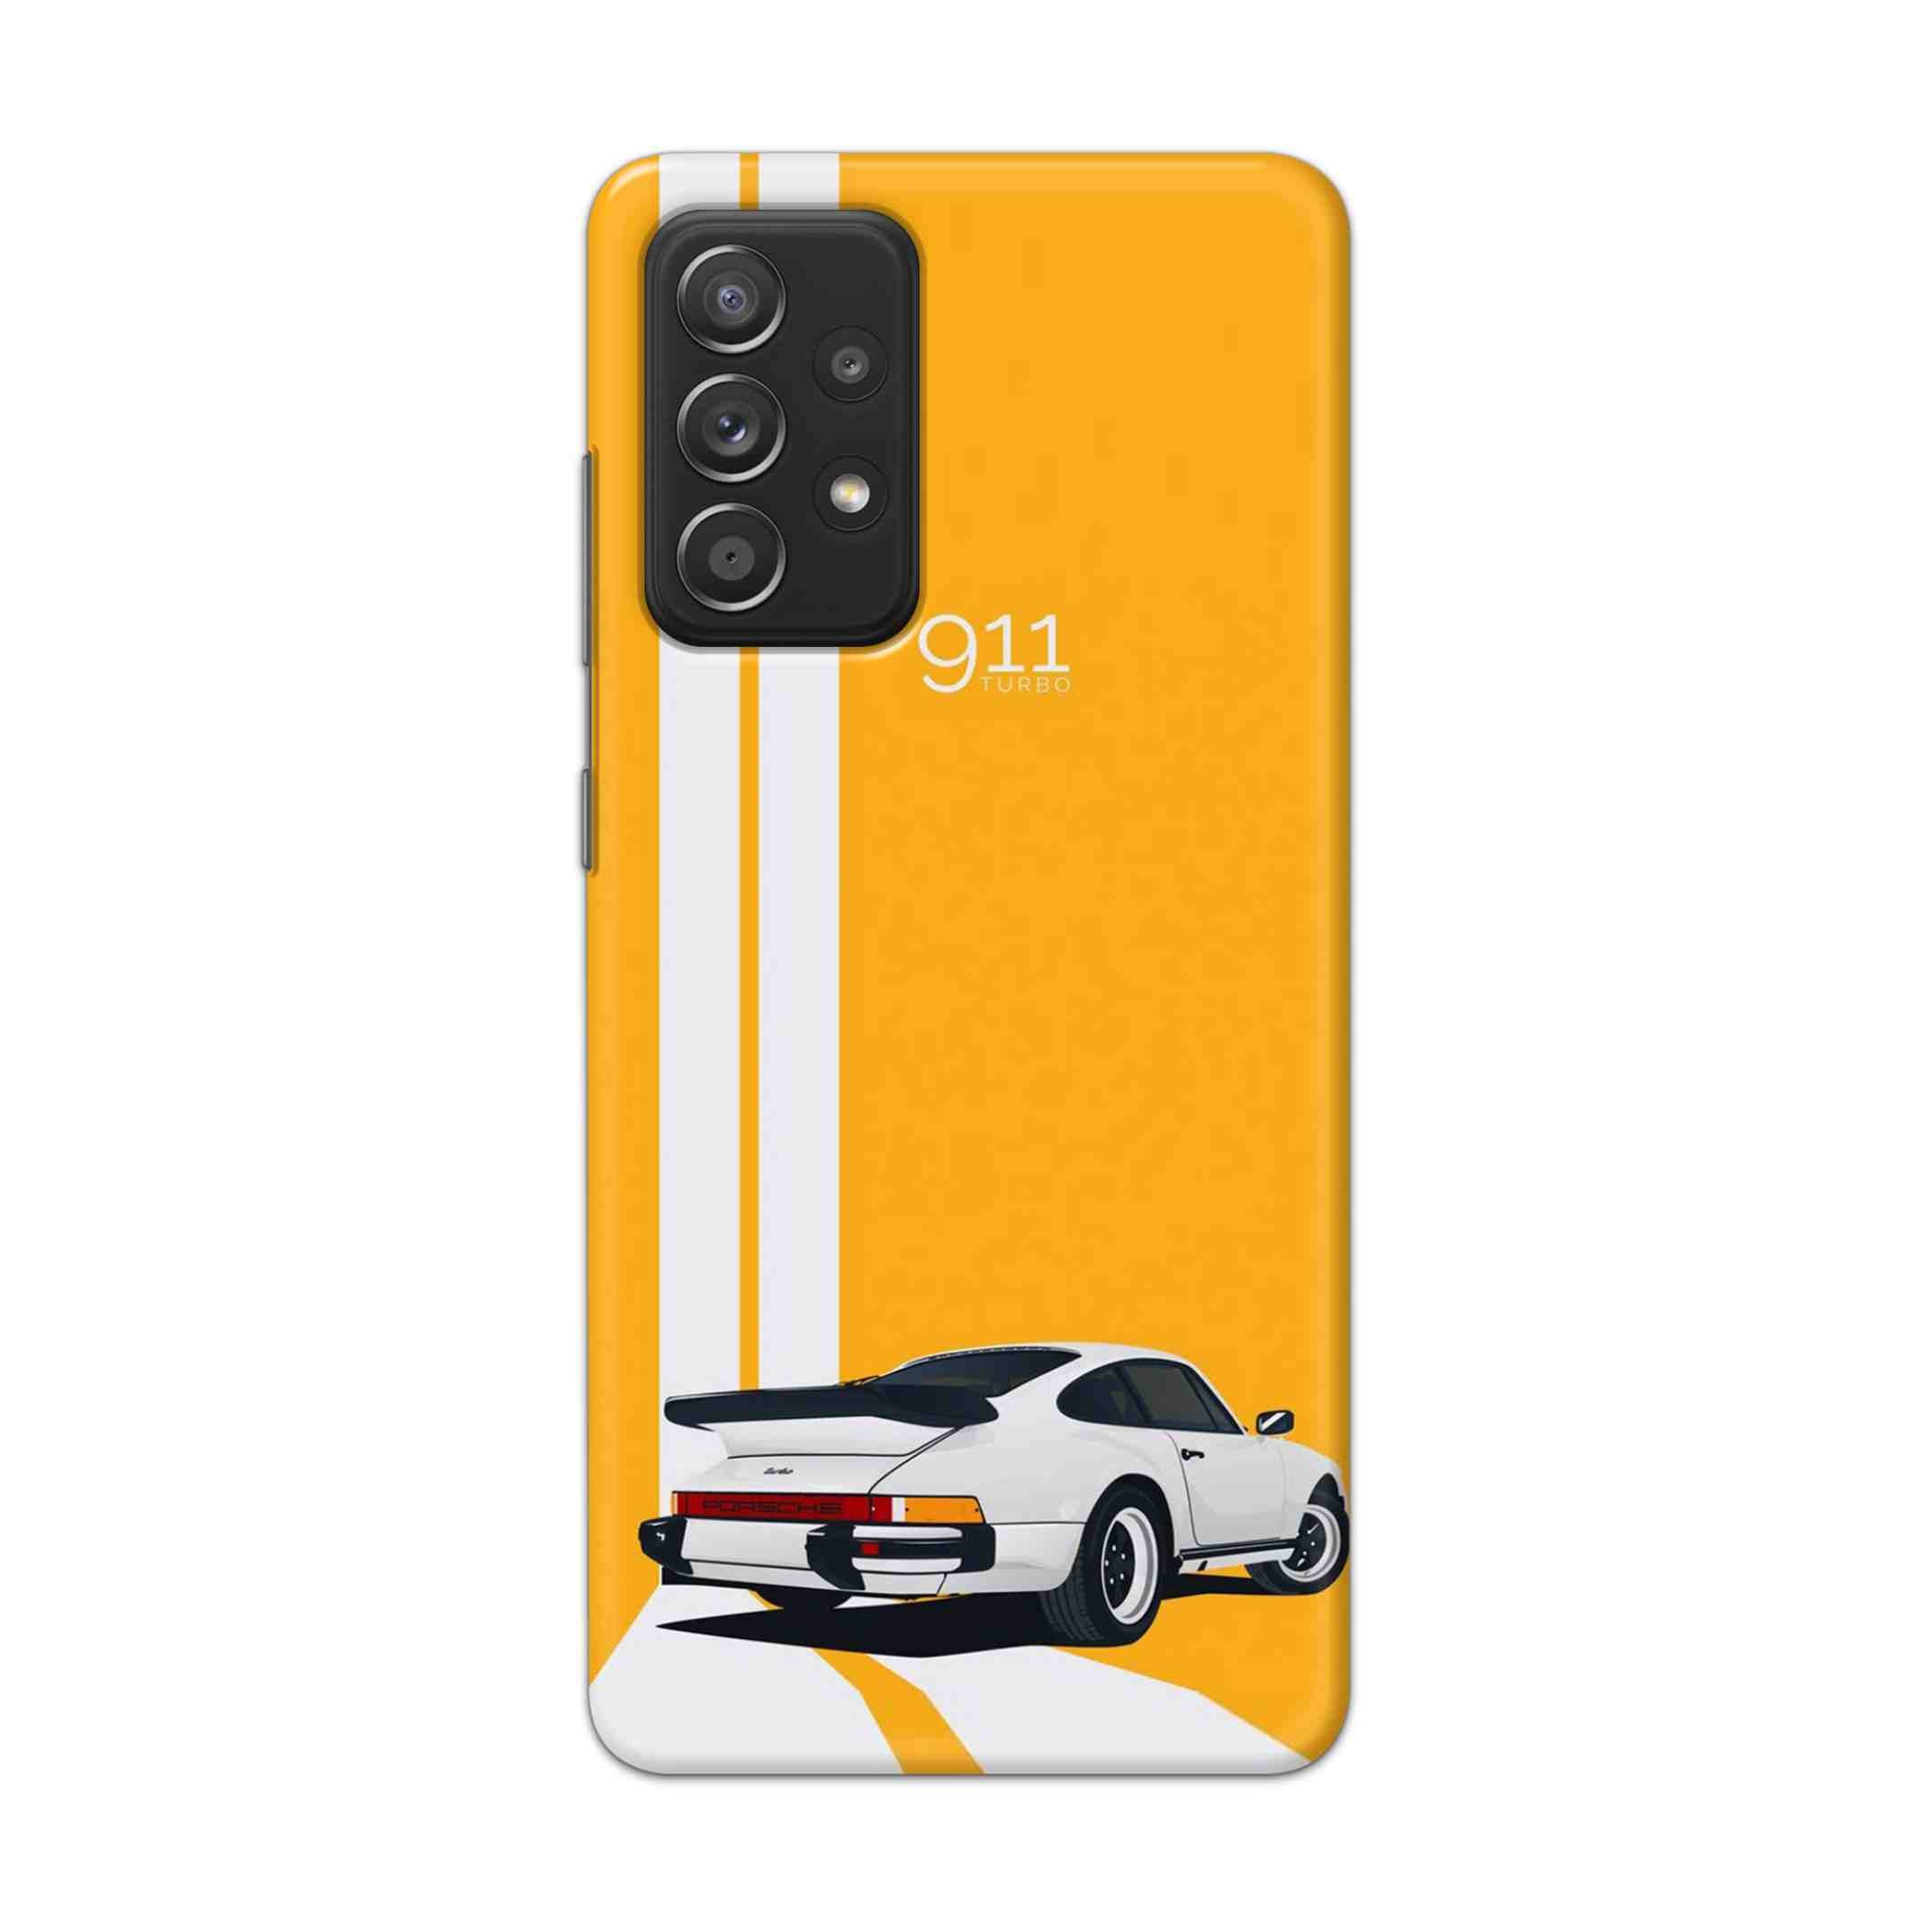 Buy 911 Gt Porche Hard Back Mobile Phone Case Cover For Samsung Galaxy A52 Online